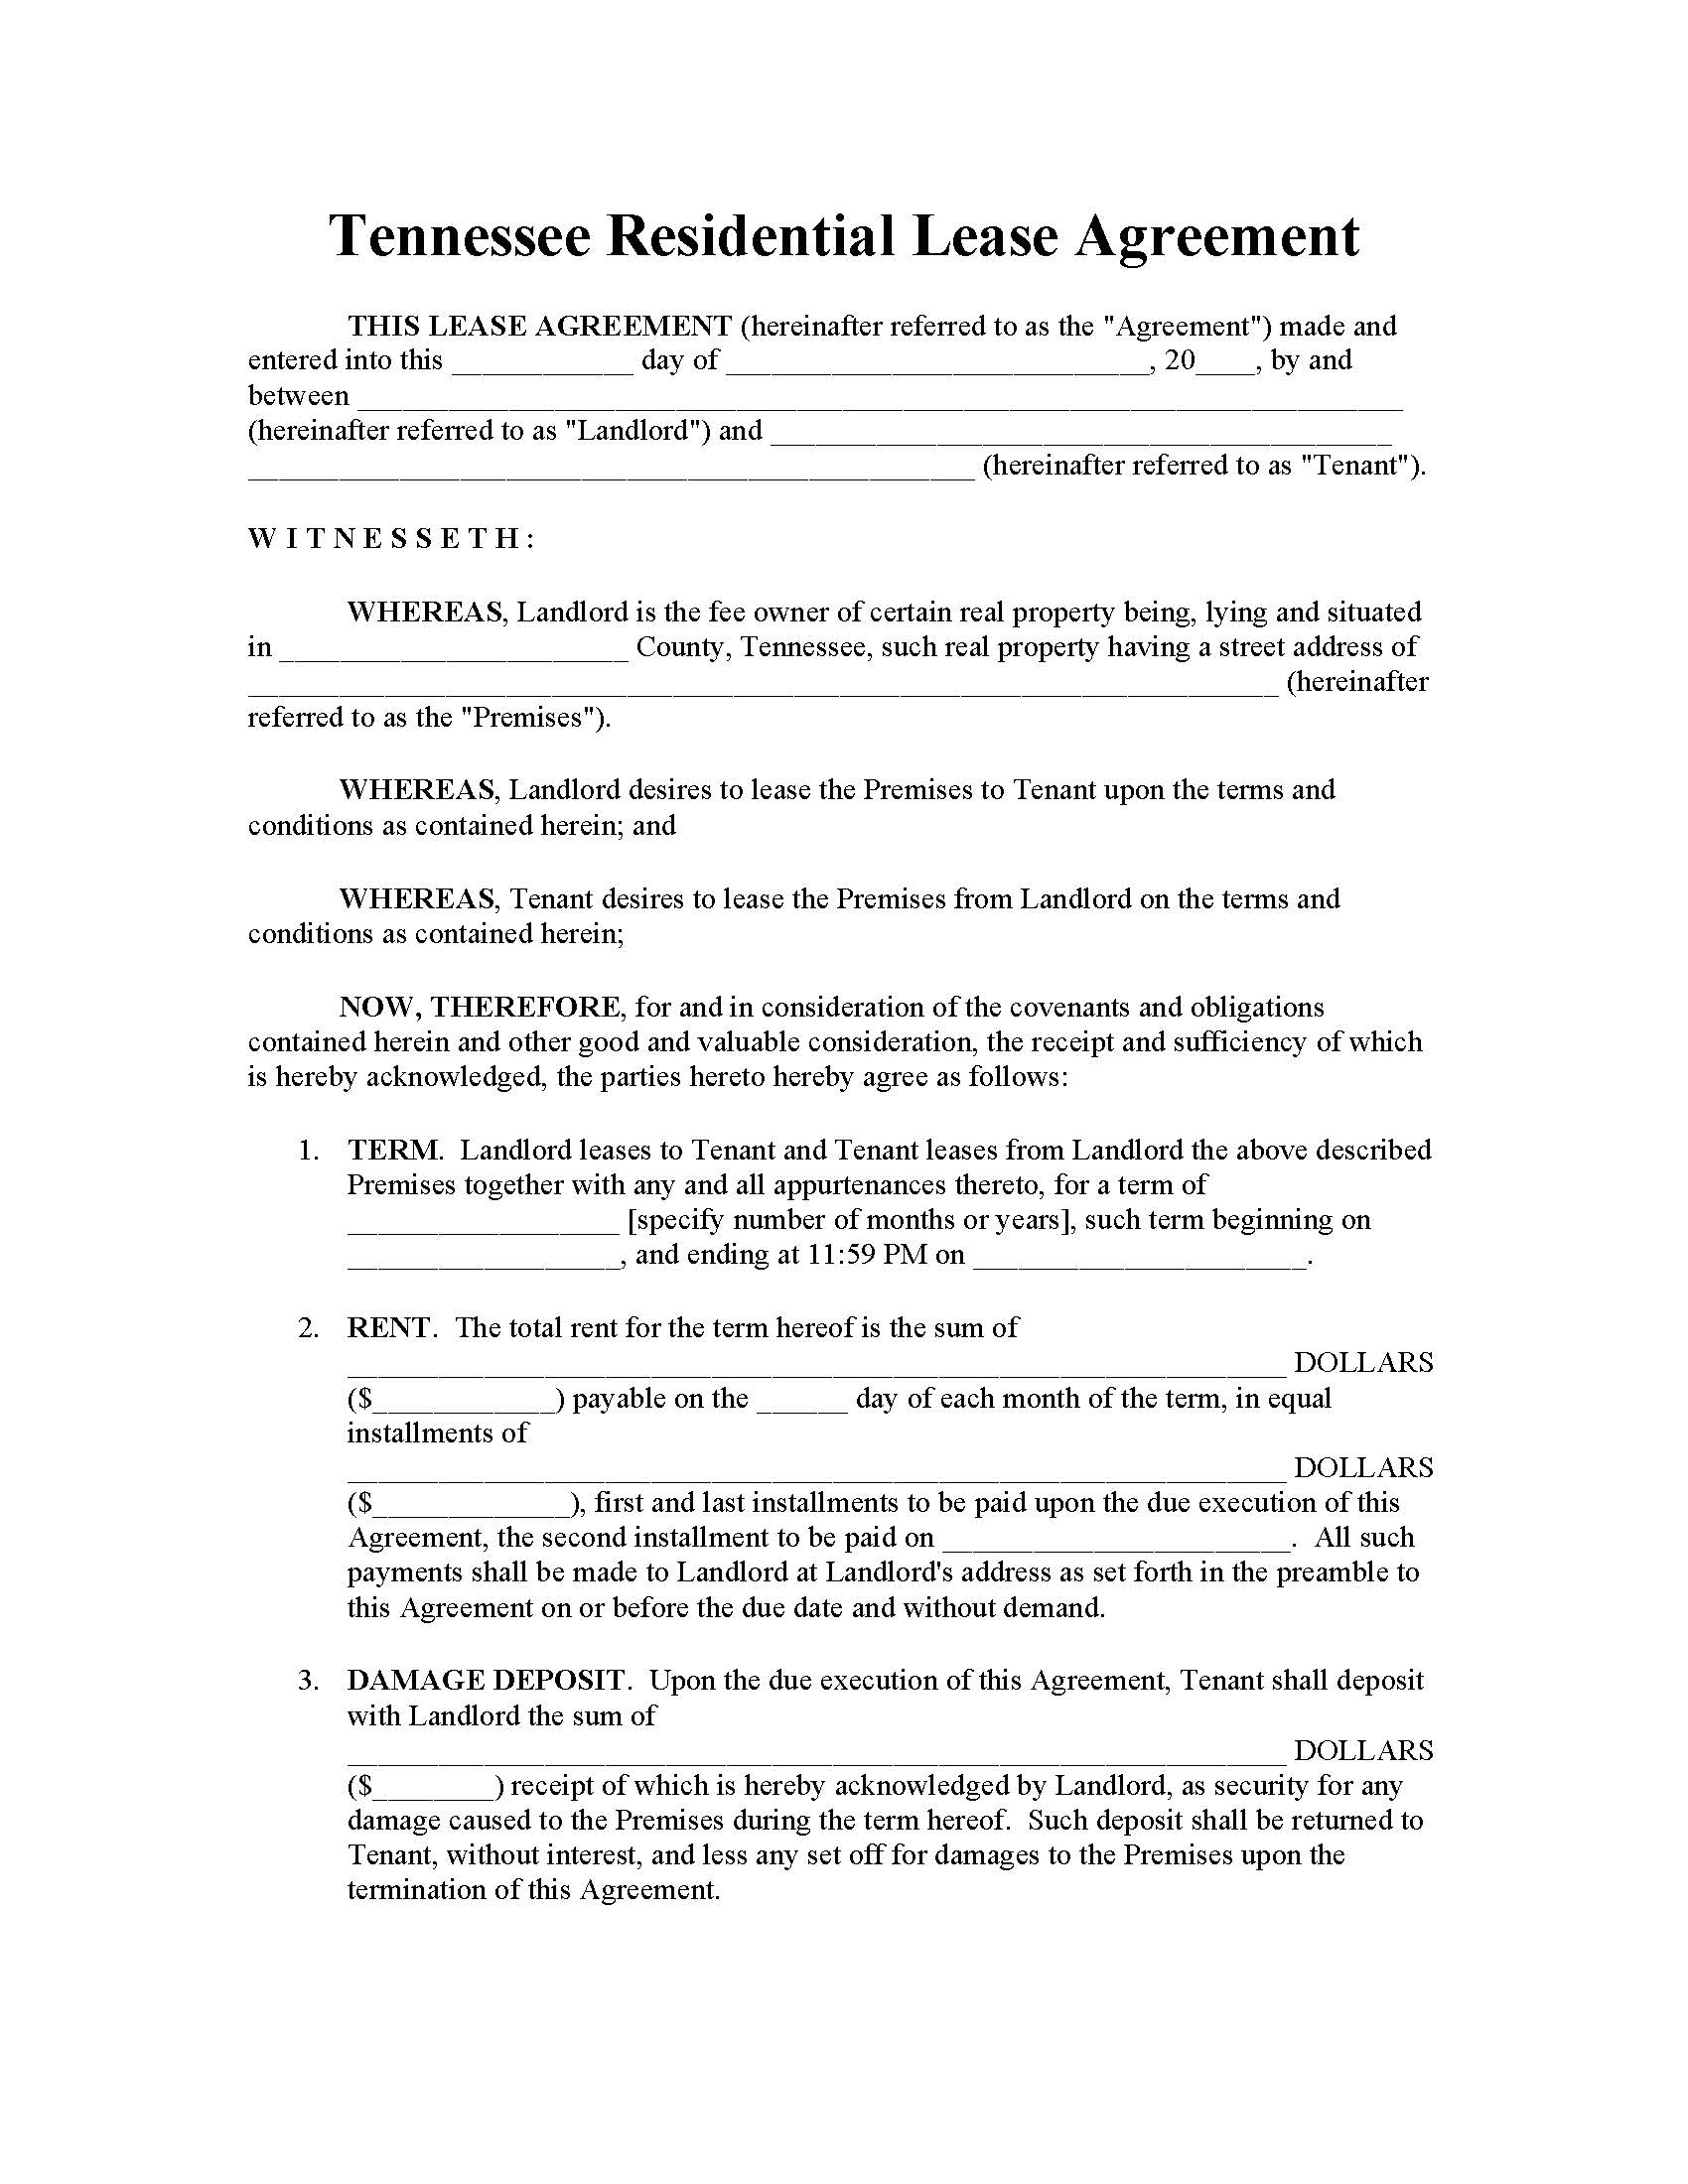 free-tennessee-residential-lease-agreement-pdf-ms-word-riset